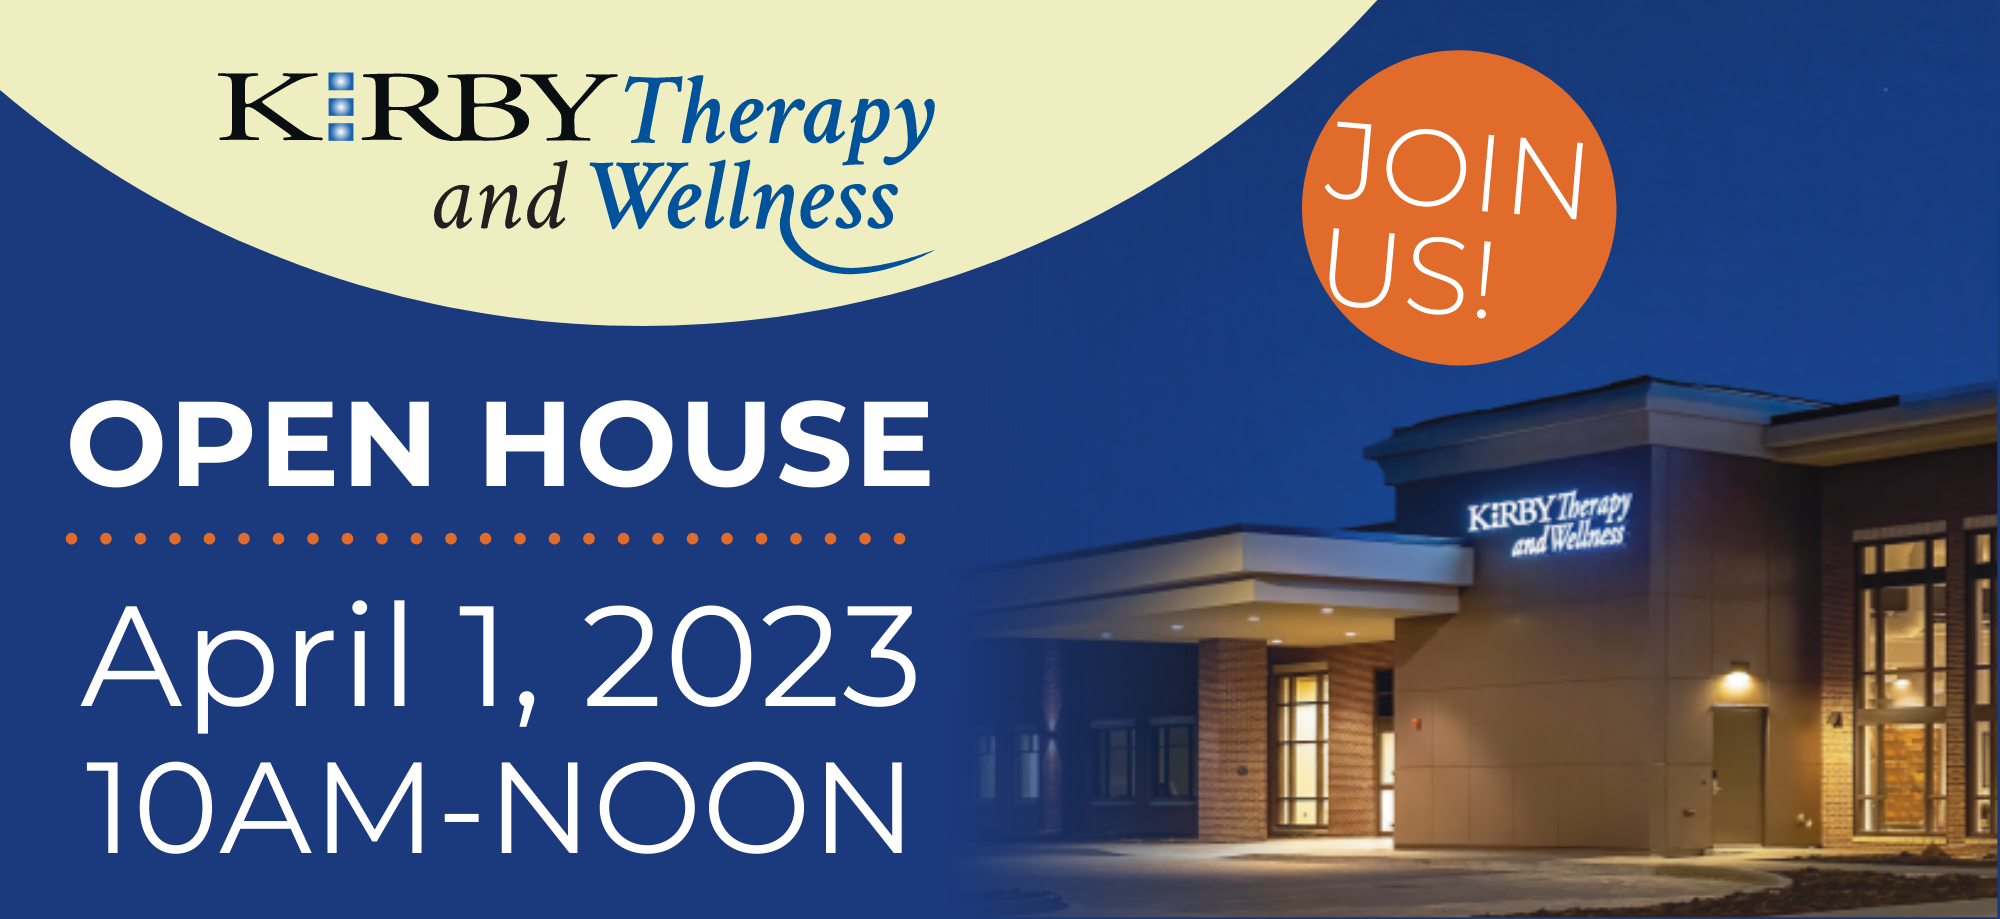 Join us! Kirby Therapy and Wellness Open House April 1, 2023 10AM-Noon